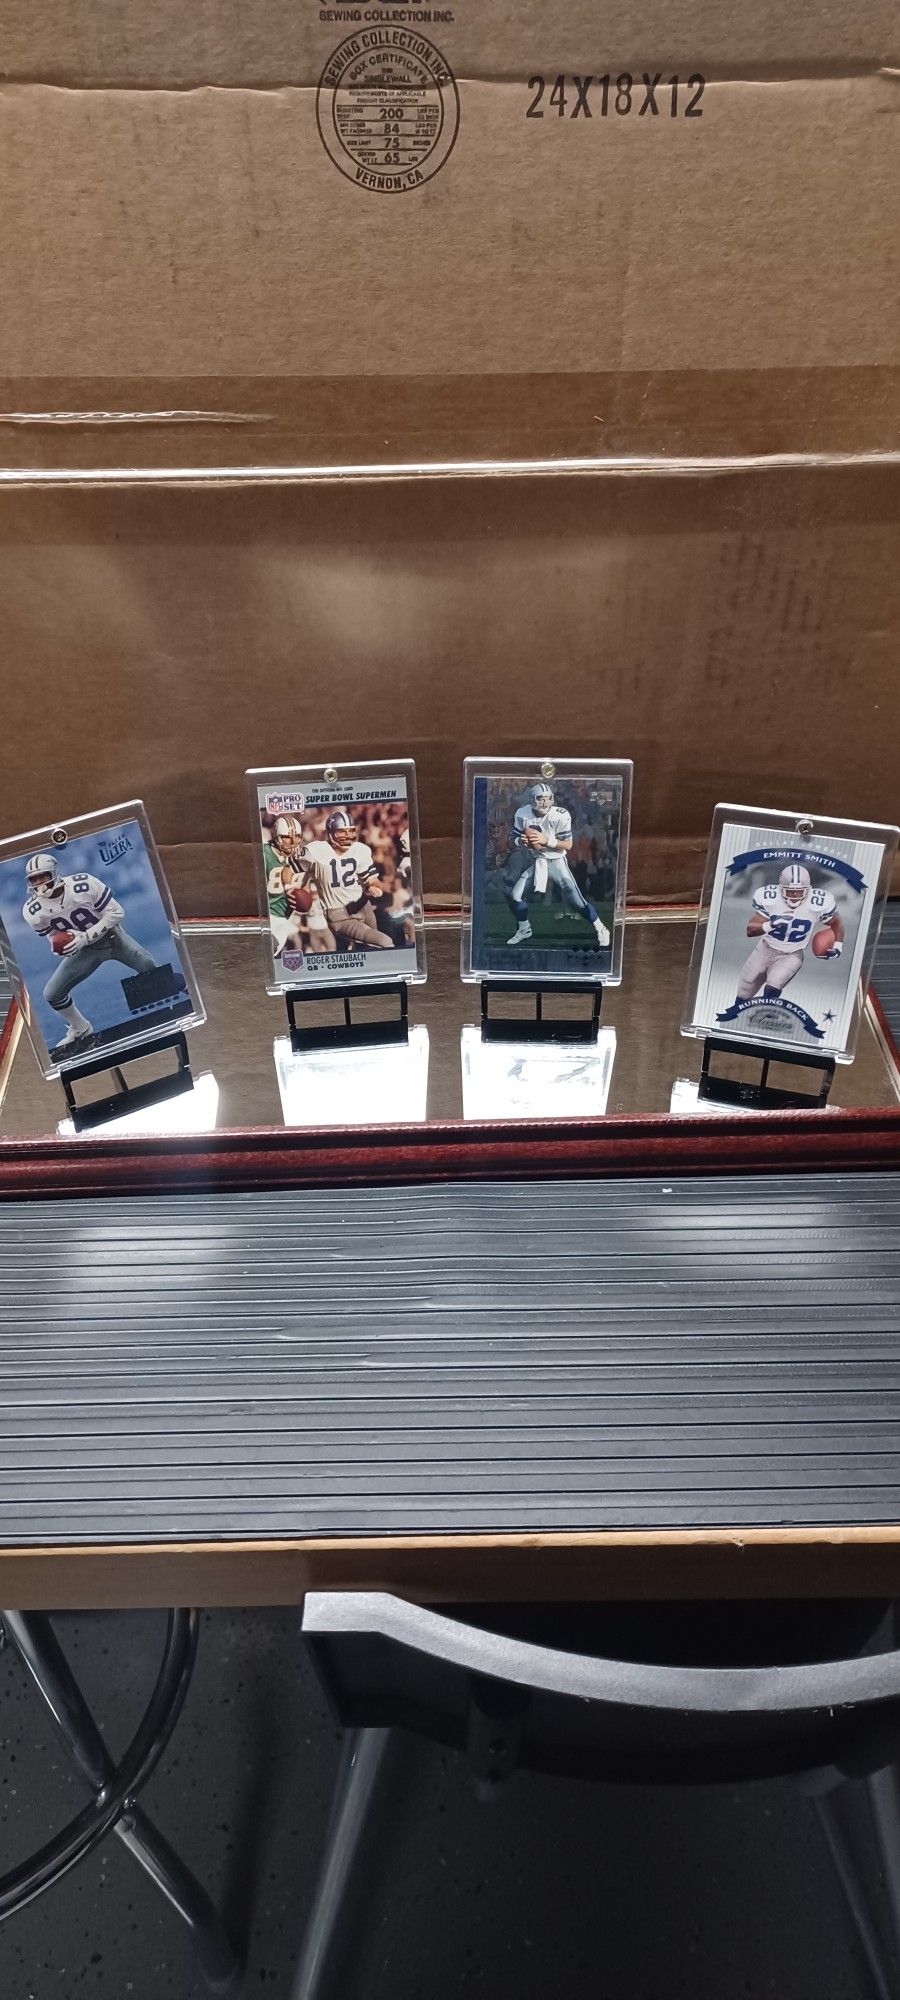 DALLAS COWBOYS SET OF 4 FOOTBALL CARDS 1990'S WITH DISPLAY STAND